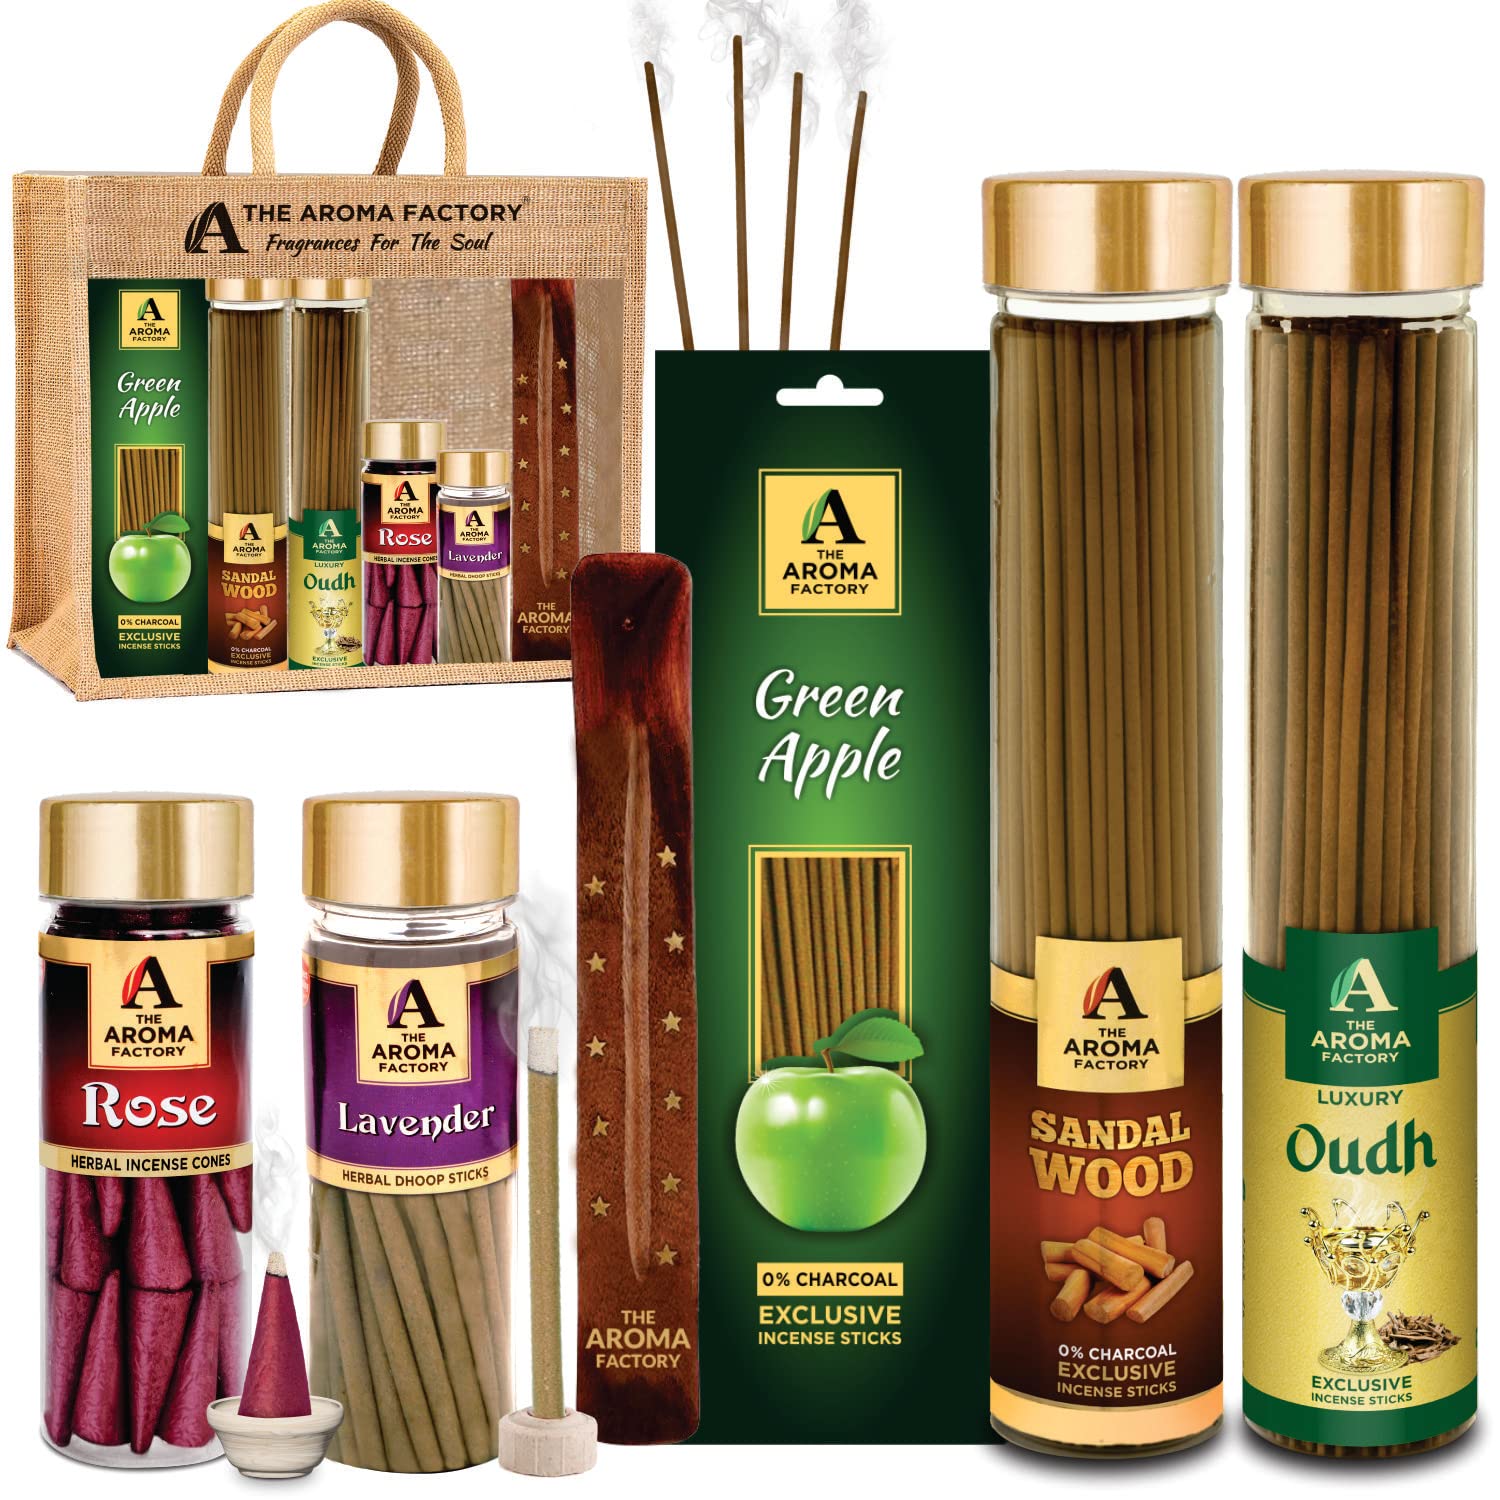 The Aroma Factory Aromatic Giftpack( Sandalwood & Oudh Agarbatti, Lavender Dhoopbatti, Rose Dhoopcone, Greenapple 30 Sticks) with Jute Bag No Charcoal, 100% Organic Incense (Aromatic)